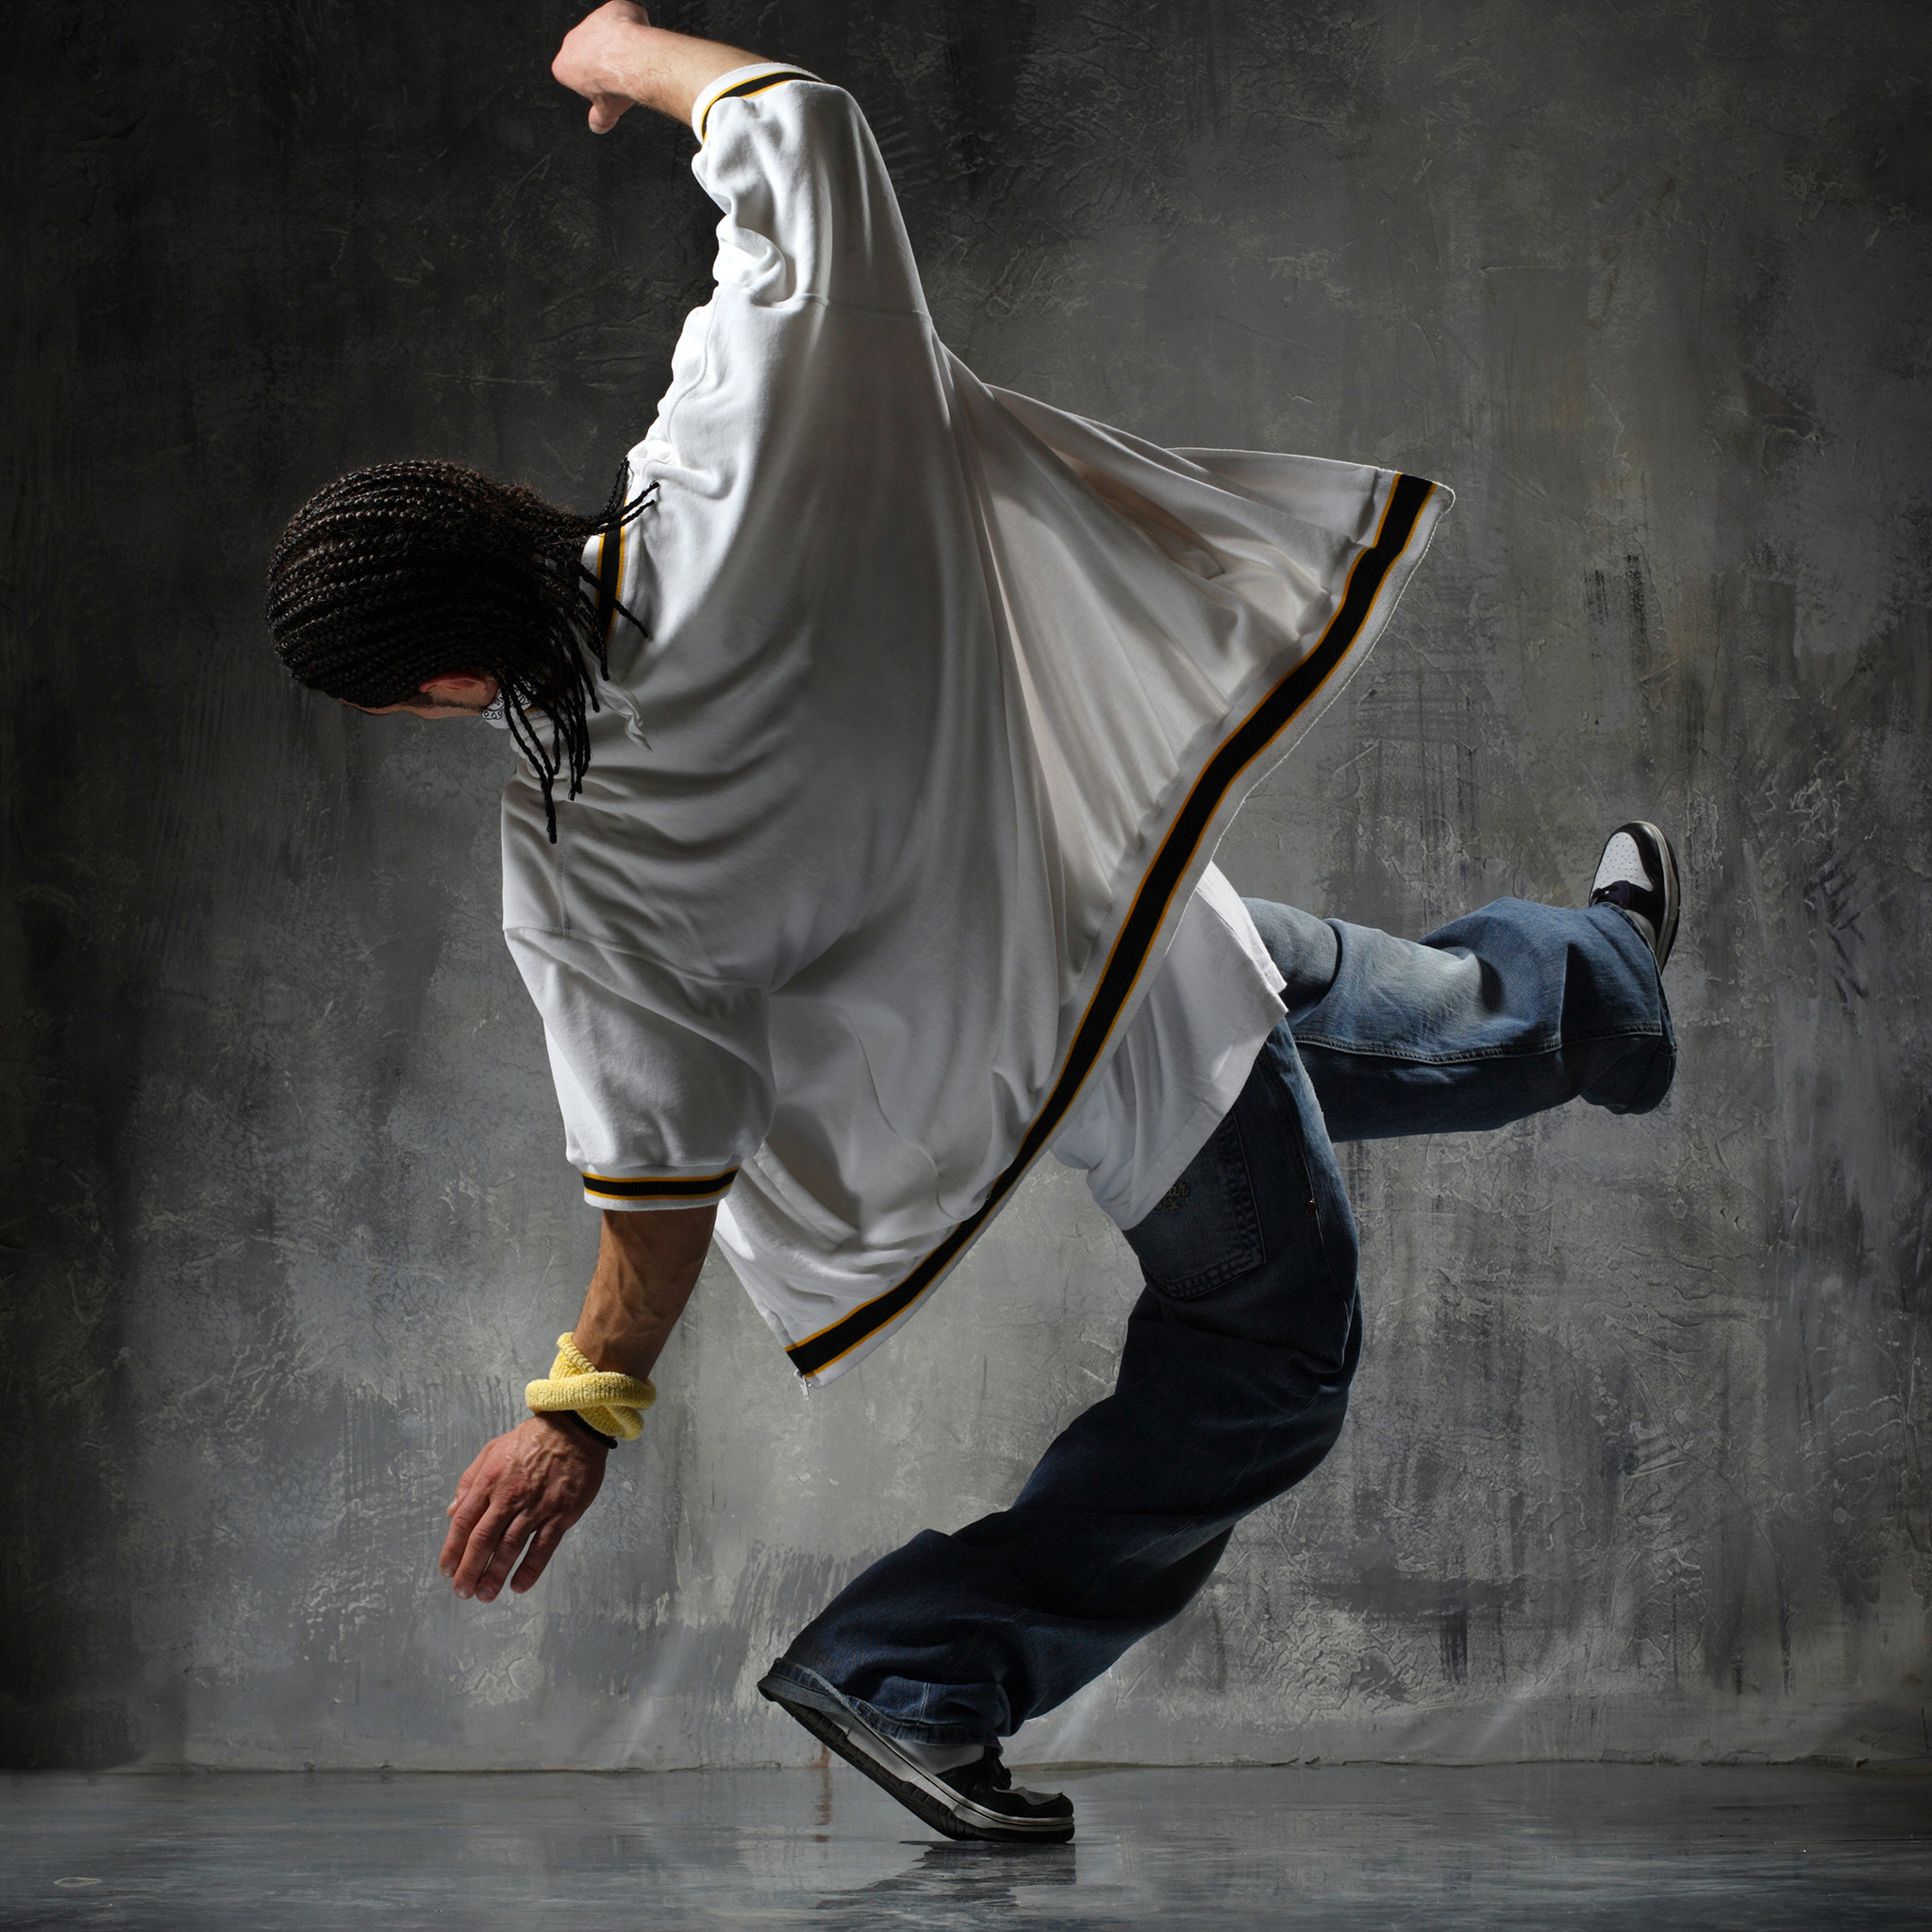 House Dance: Hip hop, The style that is all about freedom, improvisation, and feeling the music. 2050x2050 HD Wallpaper.